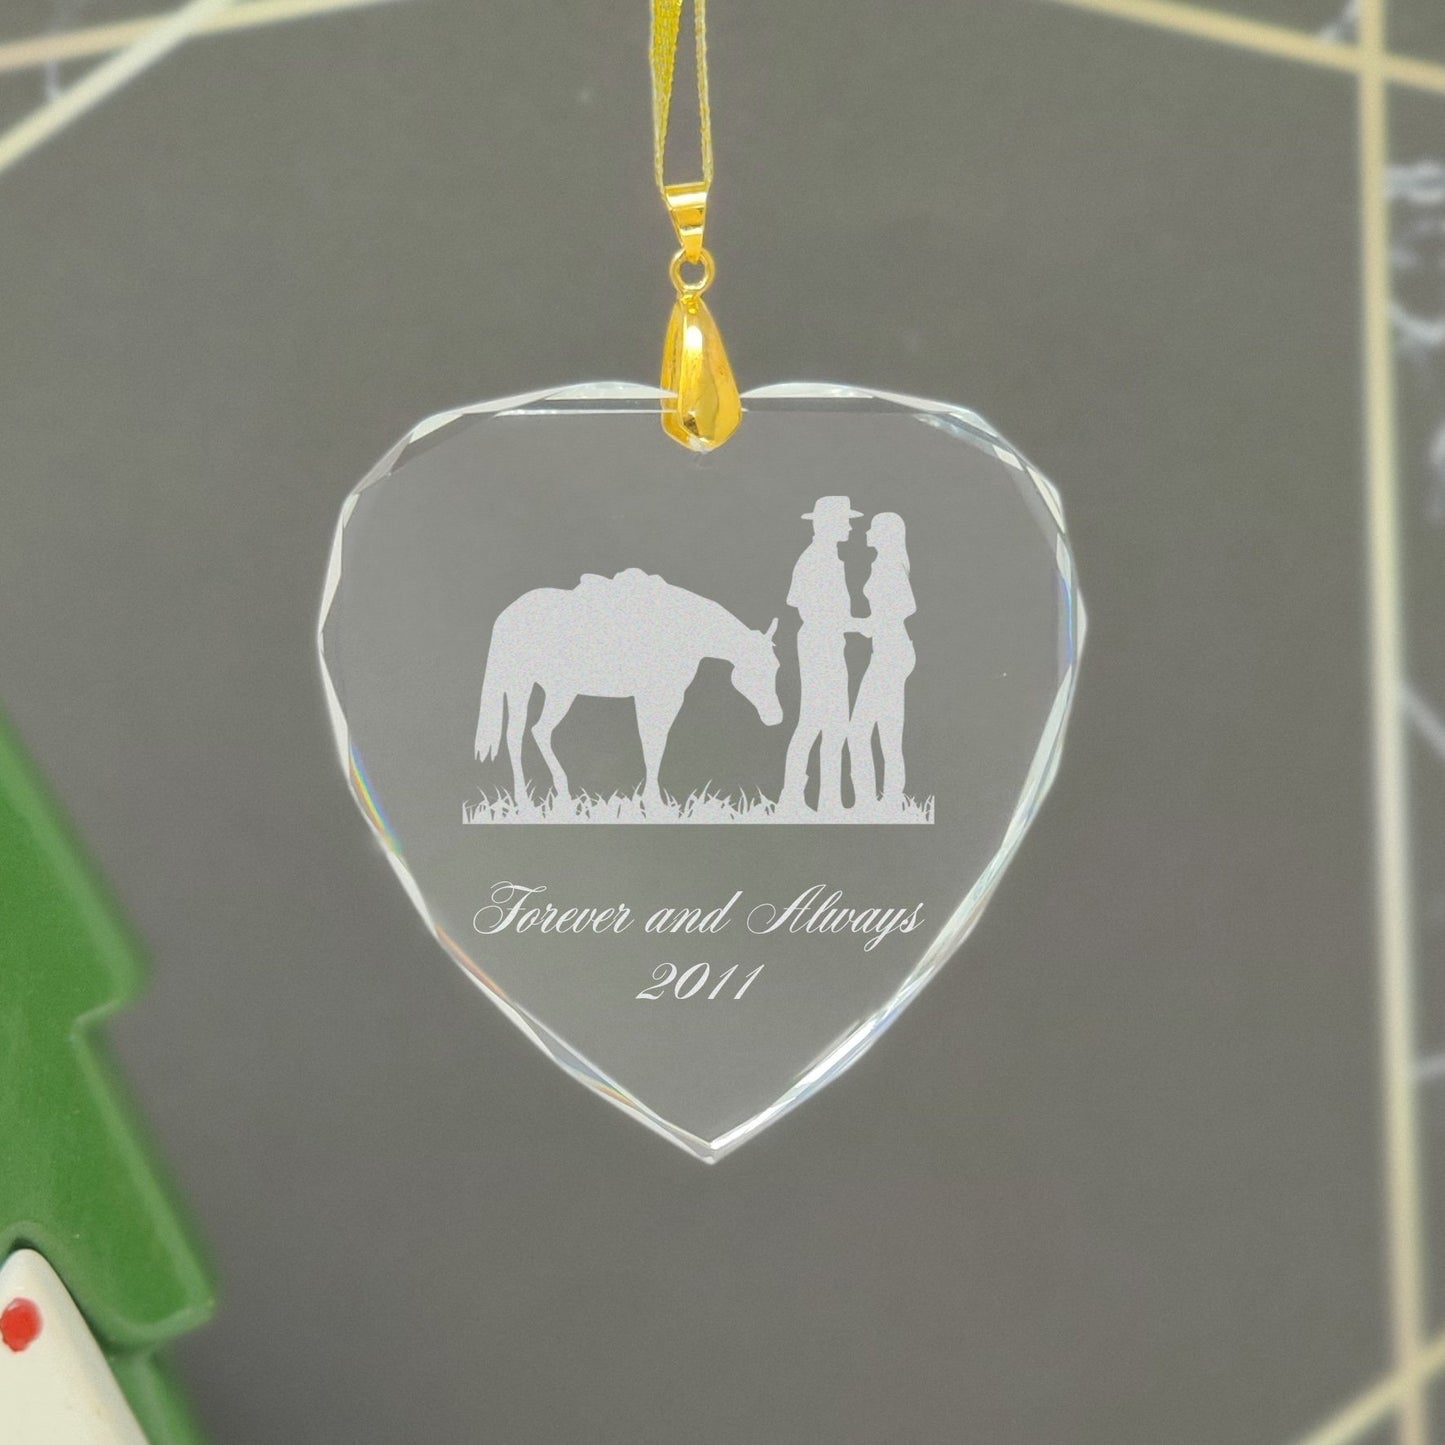 LaserGram Christmas Ornament, PT Physical Therapist, Personalized Engraving Included (Heart Shape)